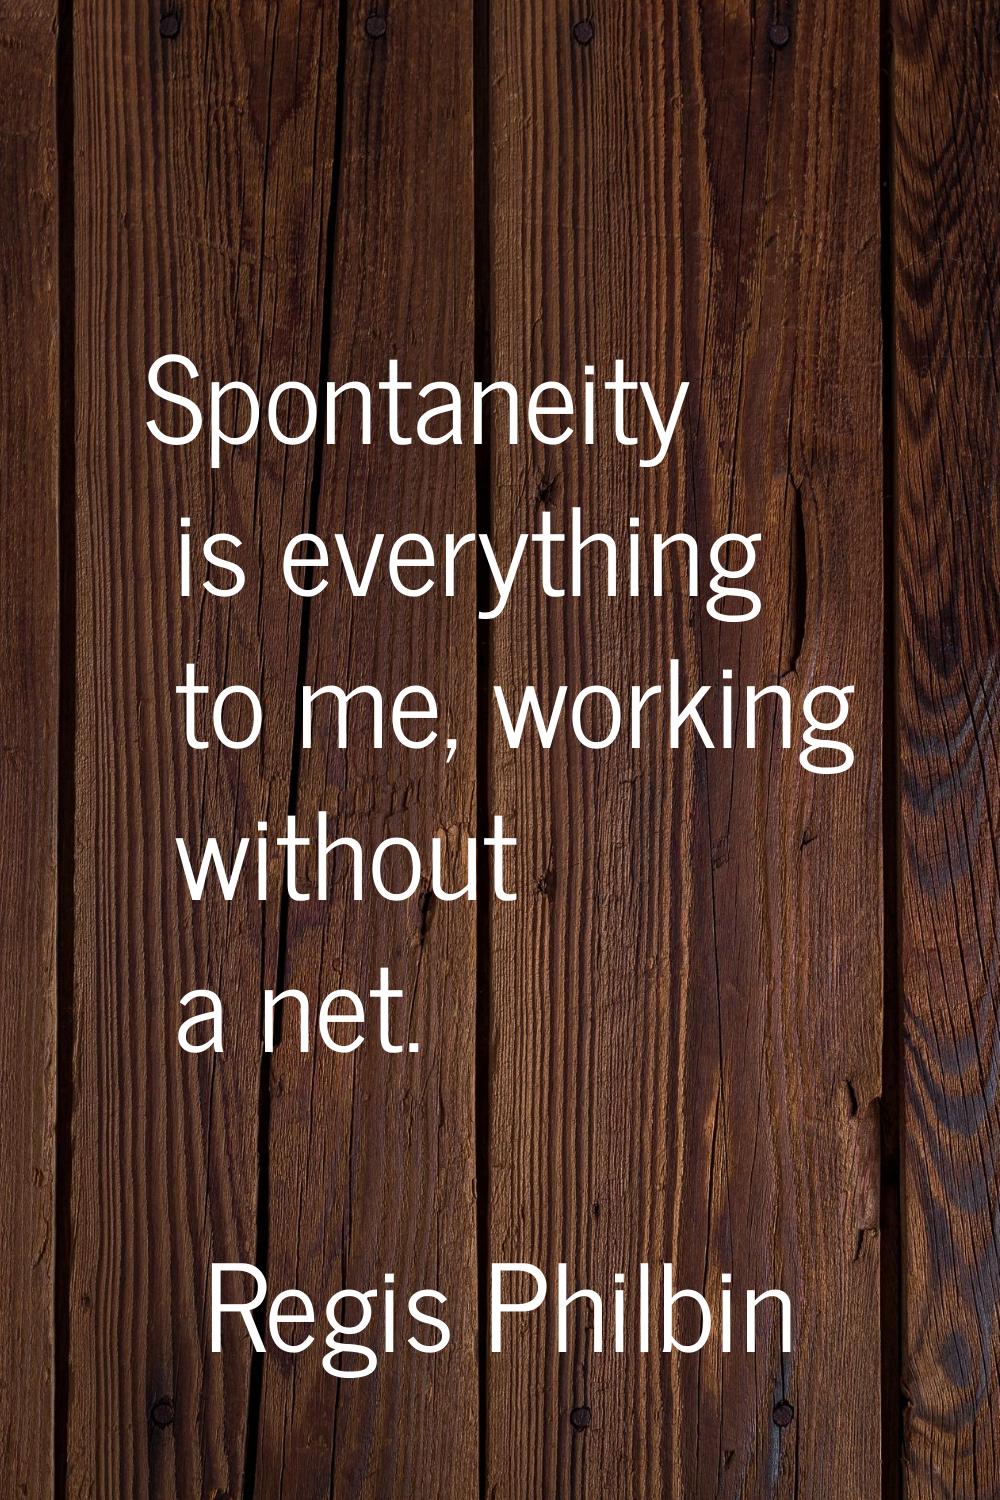 Spontaneity is everything to me, working without a net.